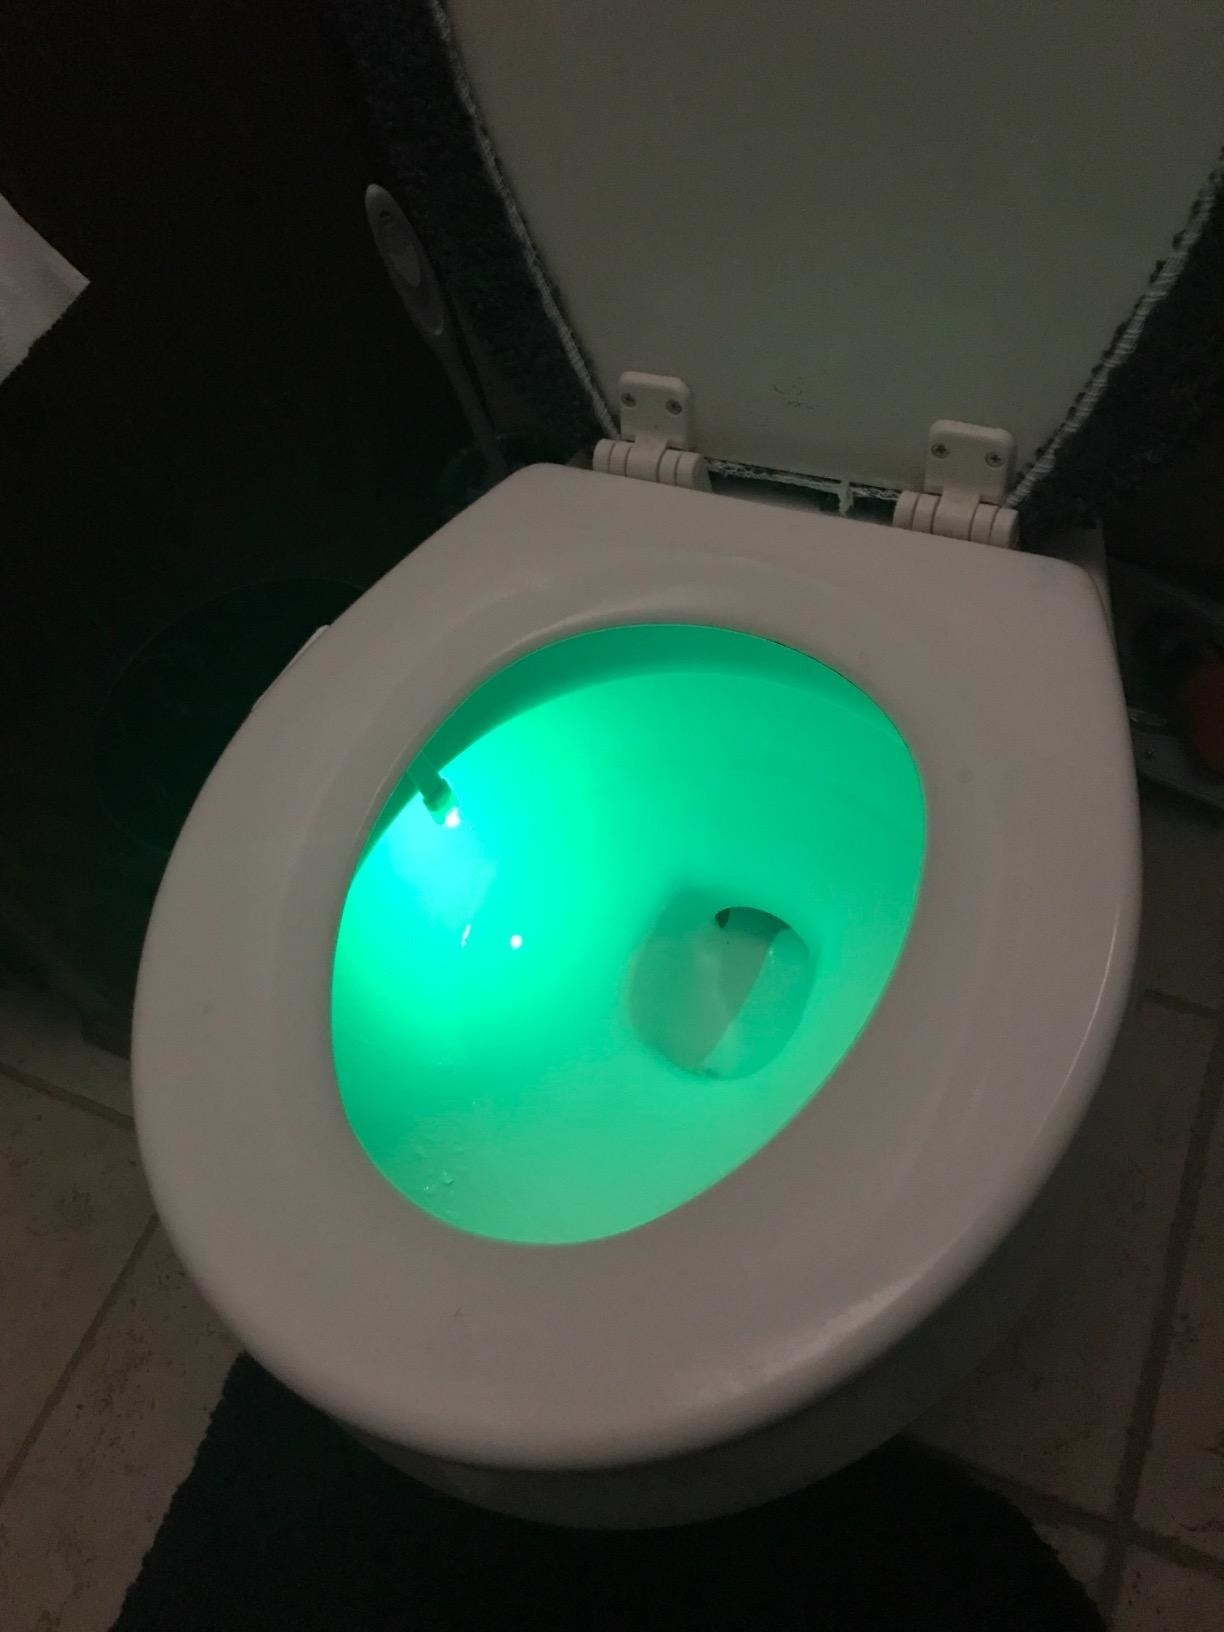 A reviewer&#x27;s toilet bowl glowing green in the dark